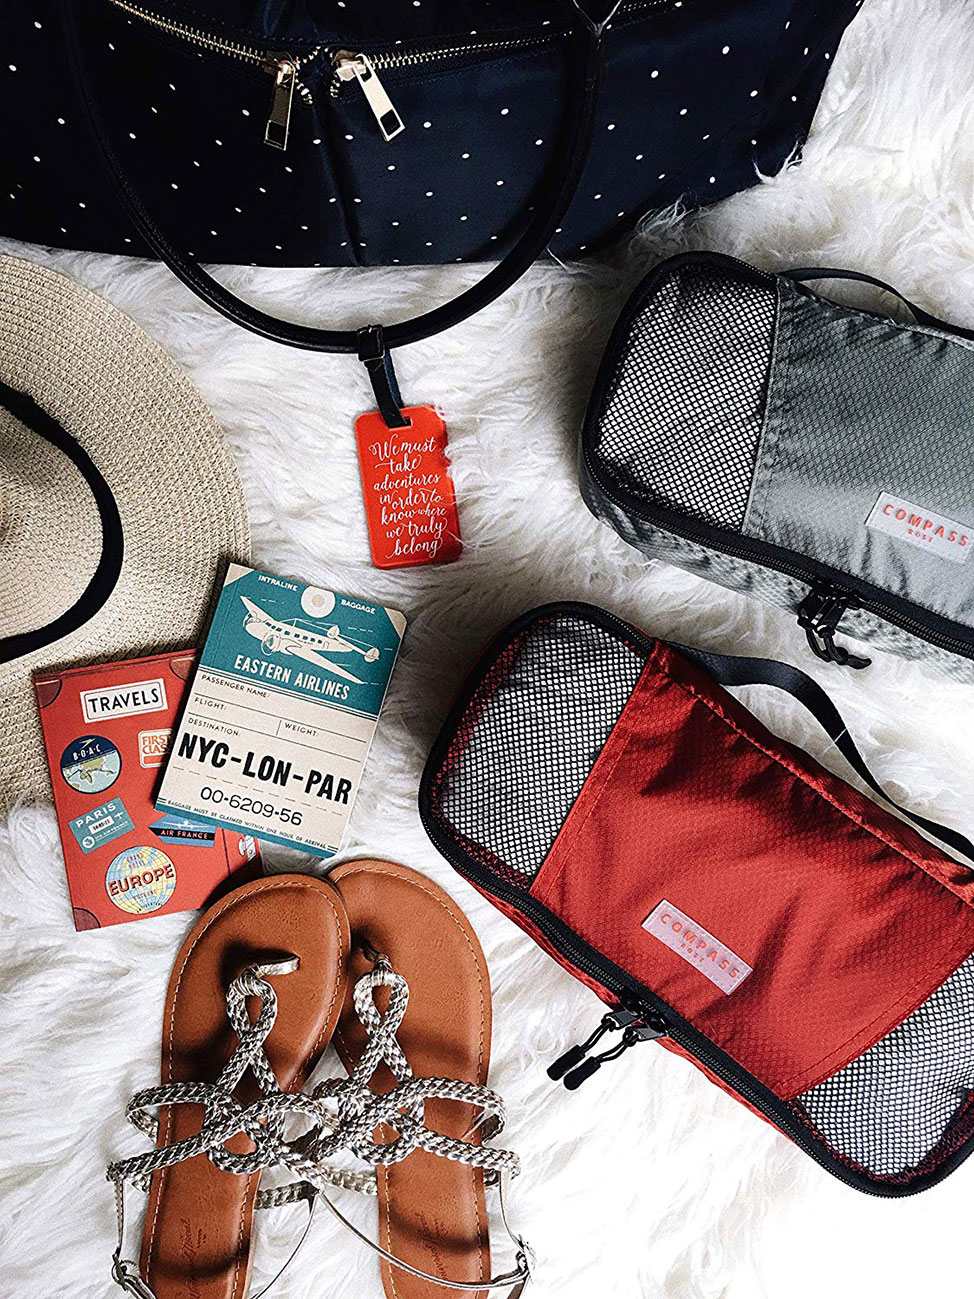 Flat lay image of the Compass Rose Packing Cubes and other travel items